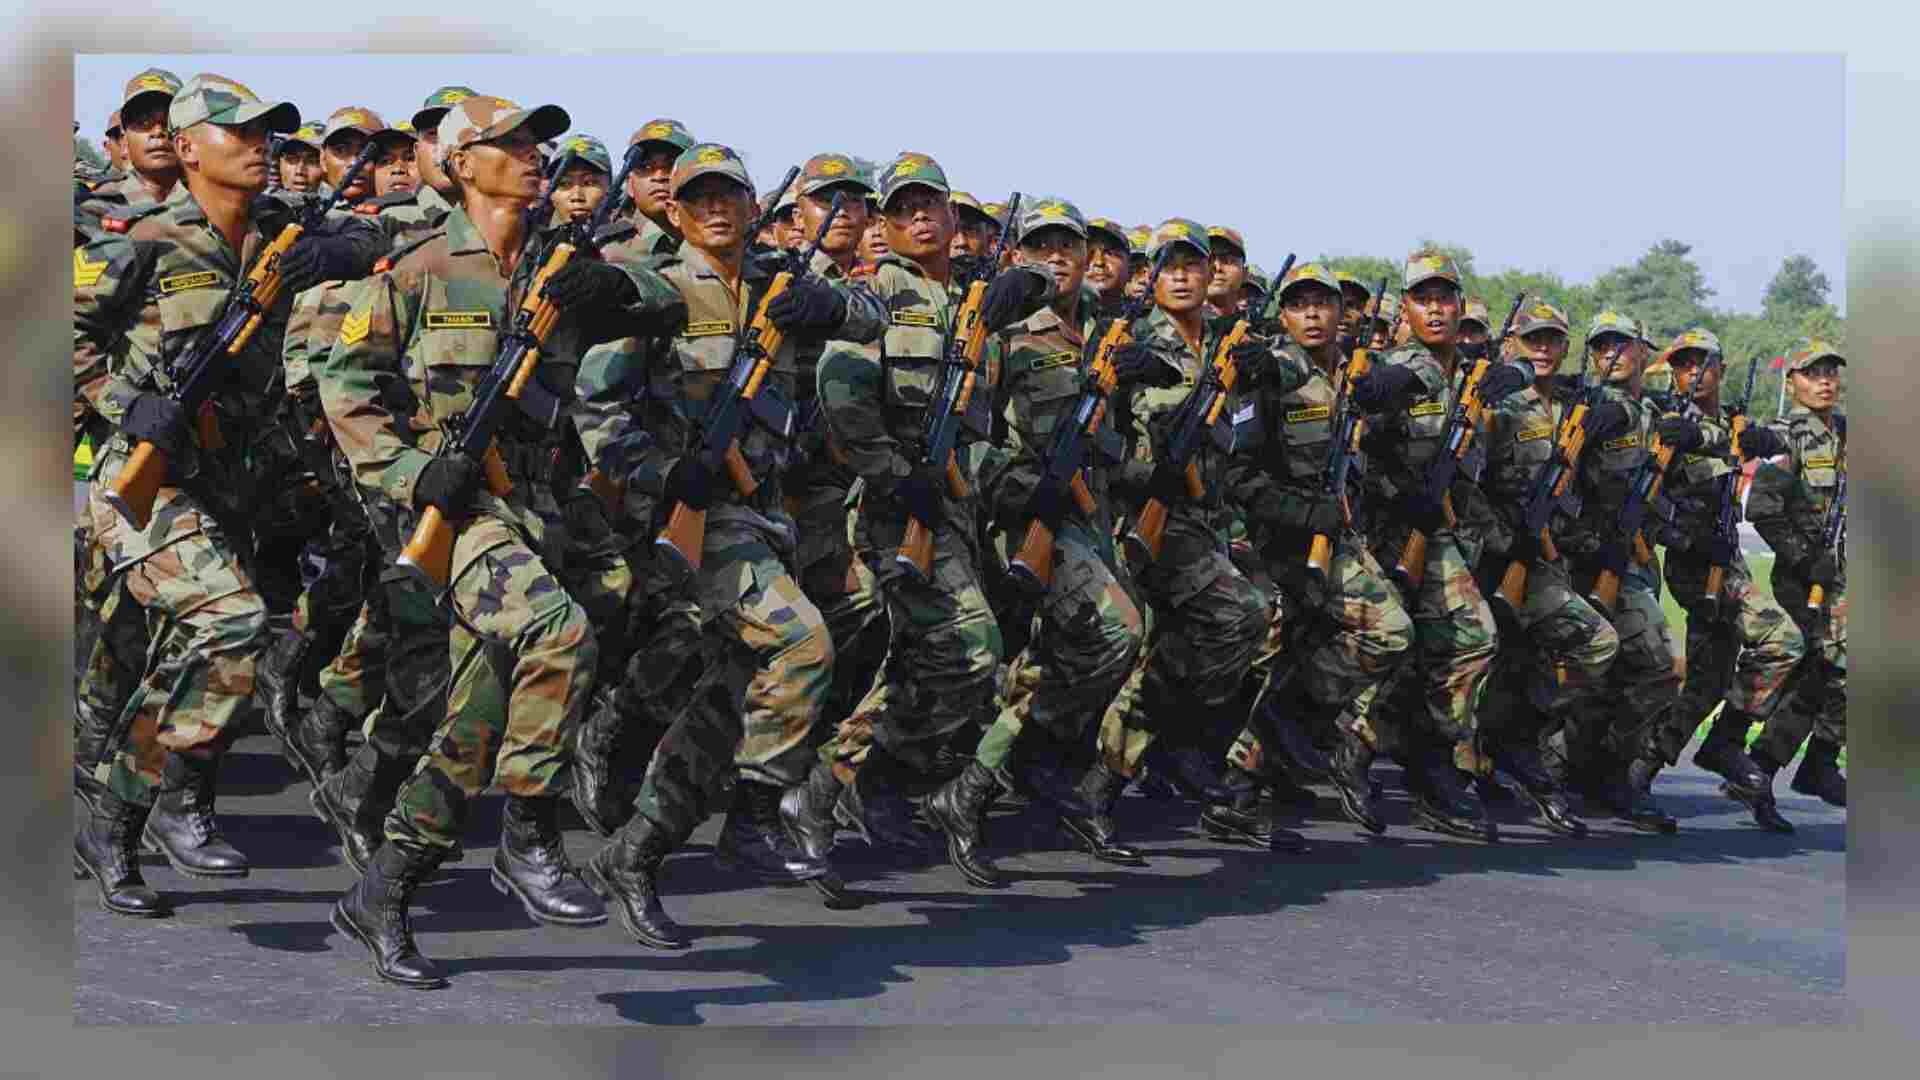 Unsung Heroes Of Kargil: The Valor And Legacy Of The Naga Regiment